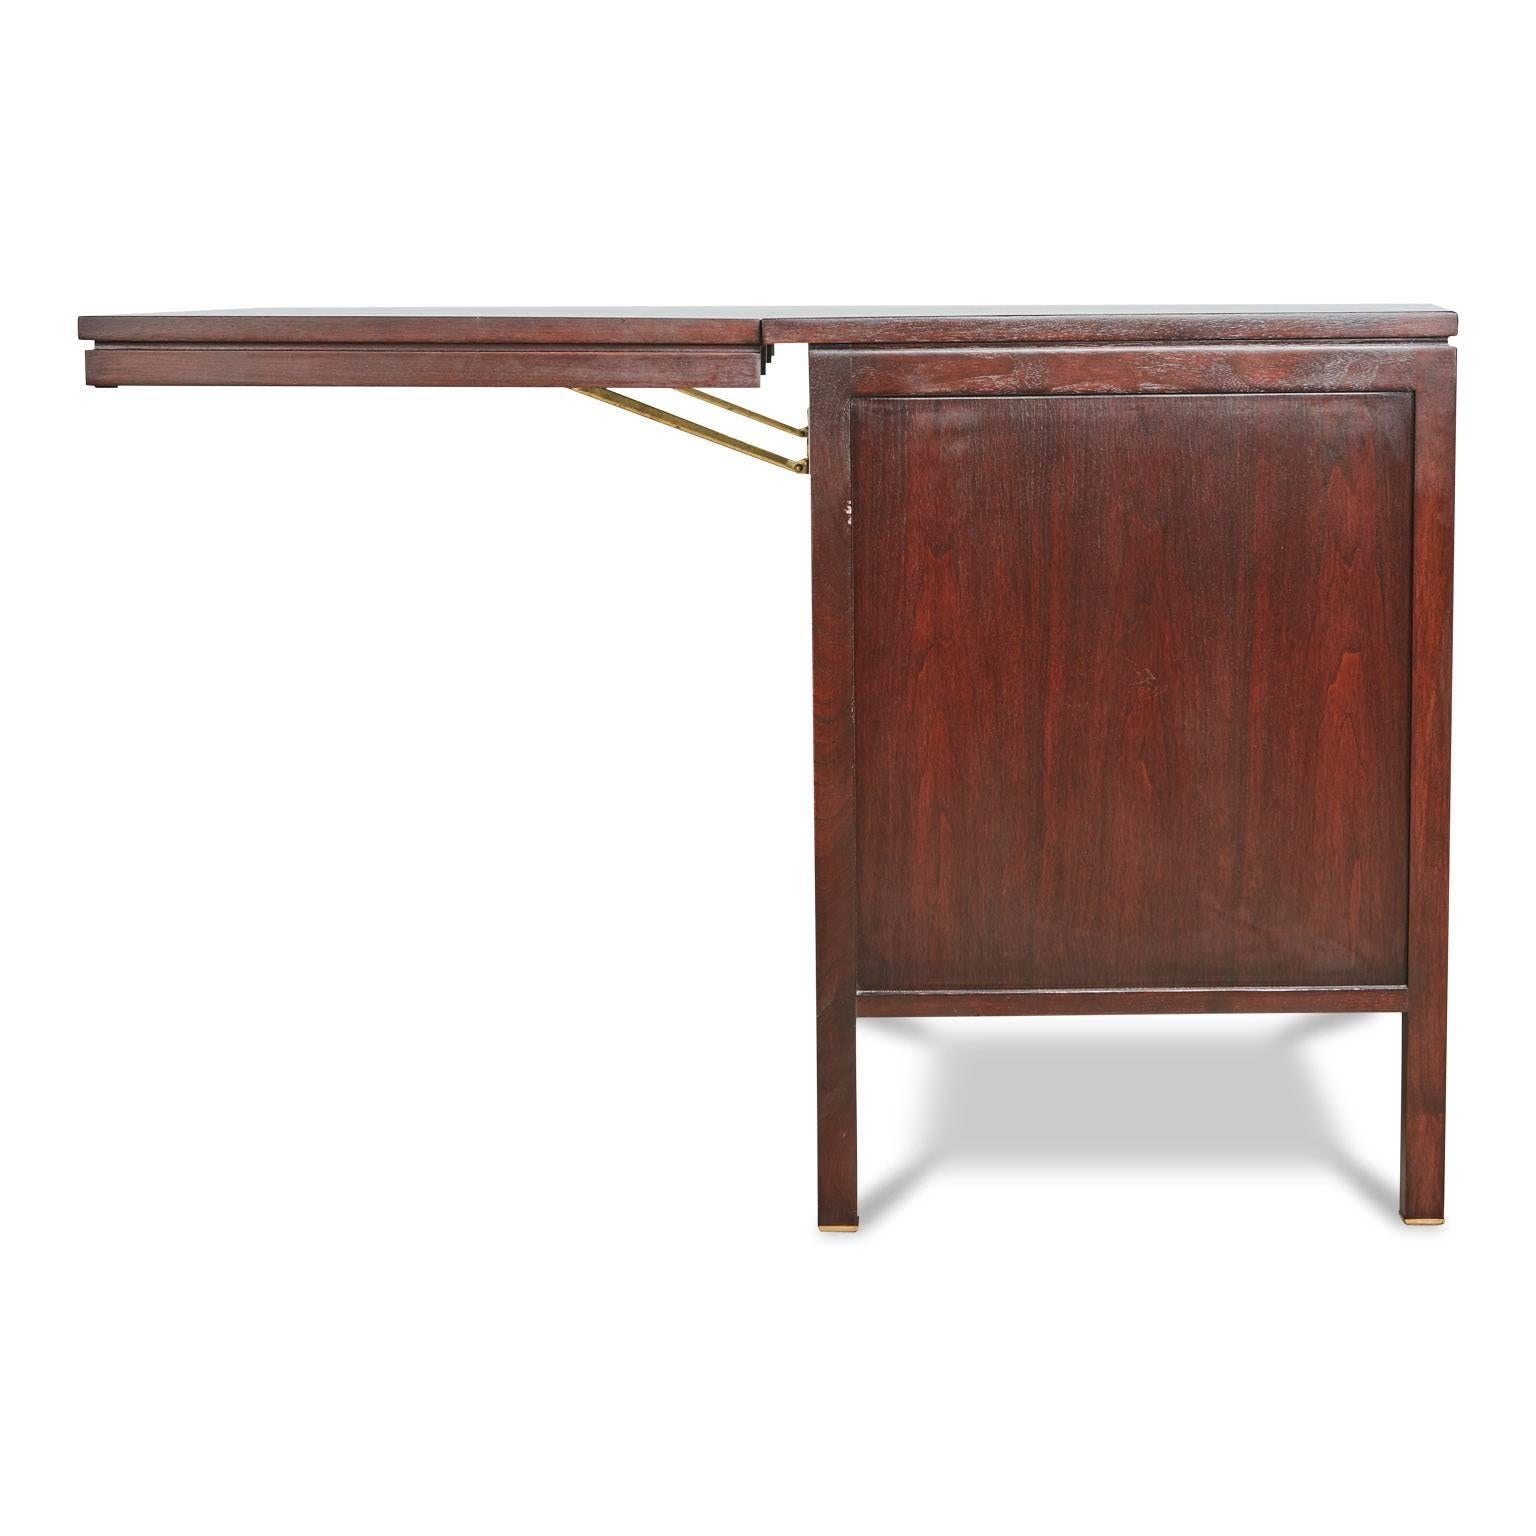 Mid-Century Modern Edward Wormley for Dunbar Tambour Credenza with Pop-Up Table, circa 1960